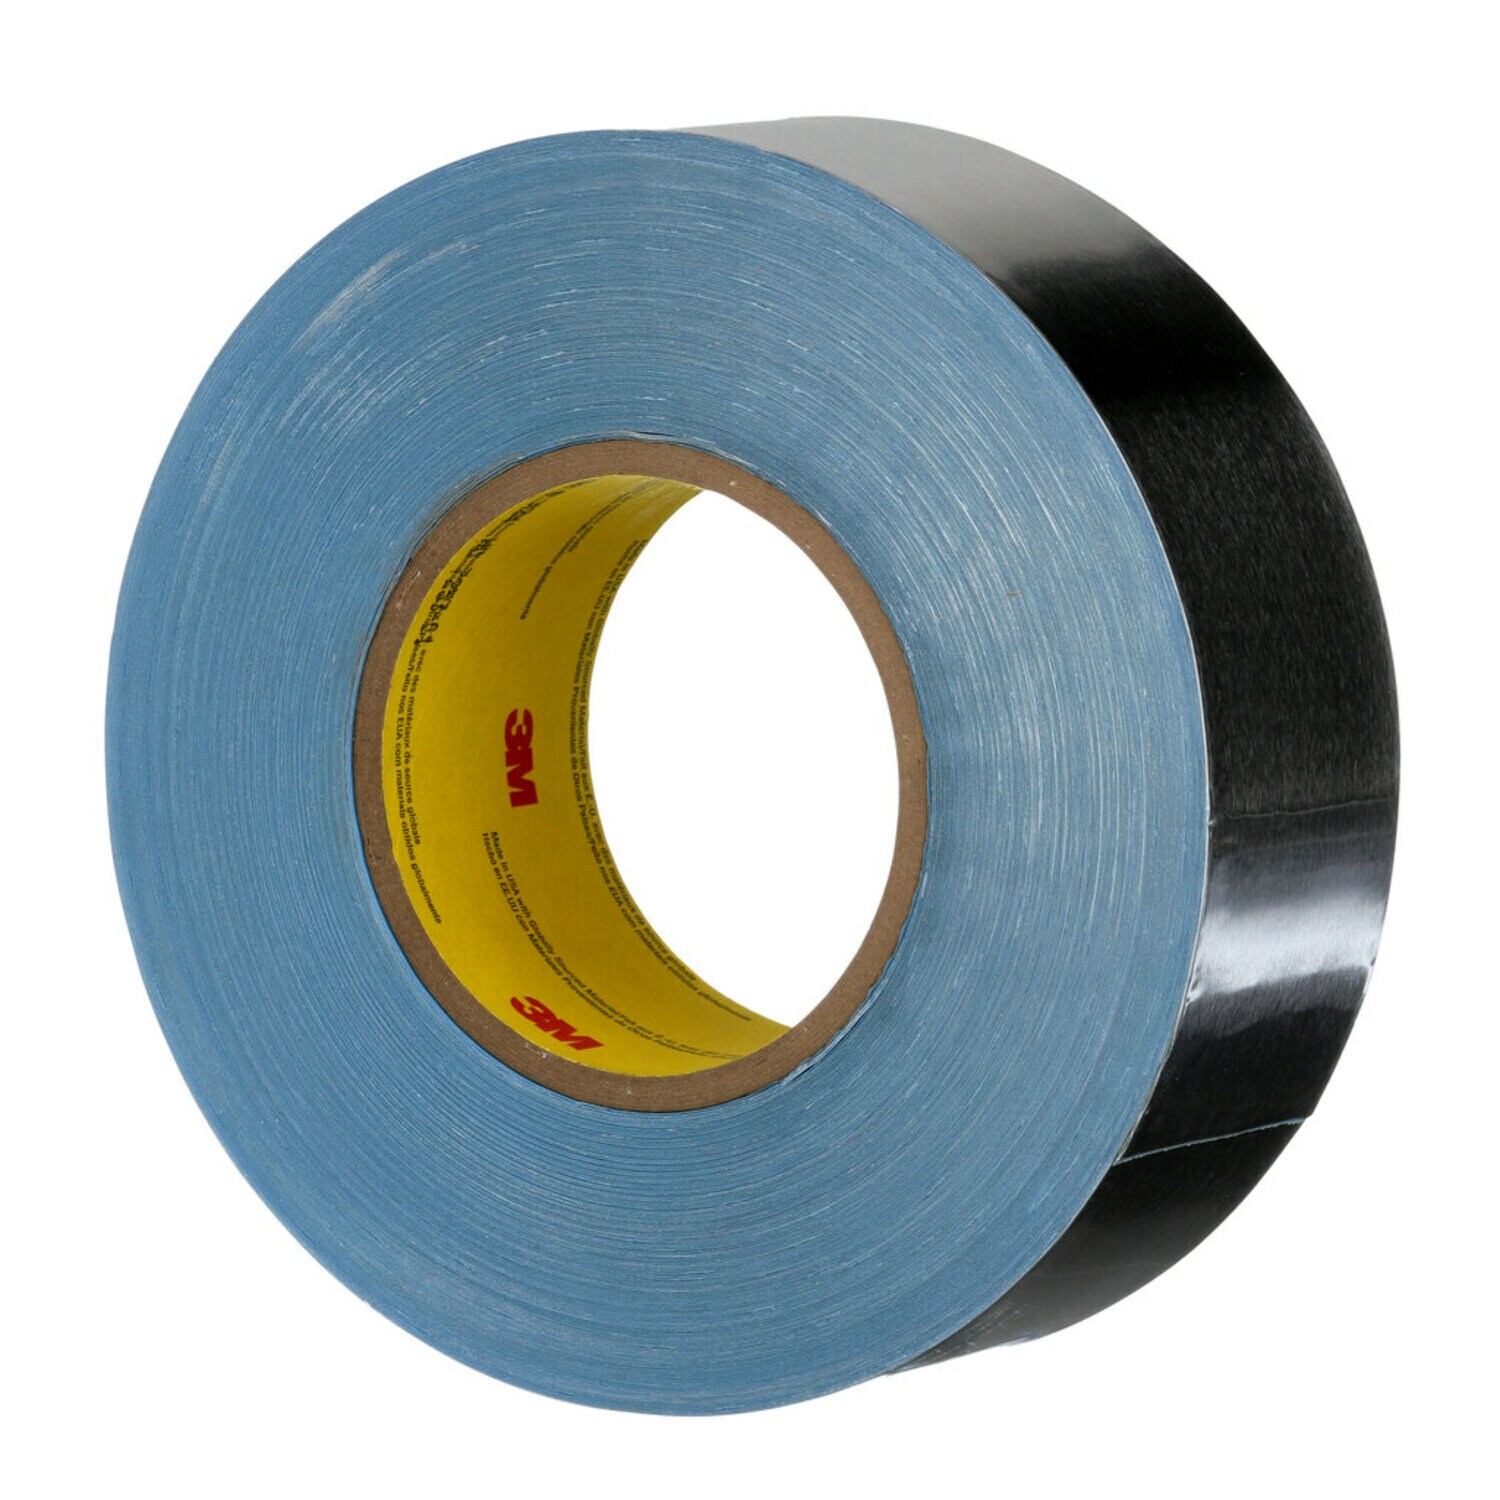 7000049092 - 3M Vibration Damping Tape 434, Silver, 1 in x 60 yd, 7.5 mil, 9 rolls
per case